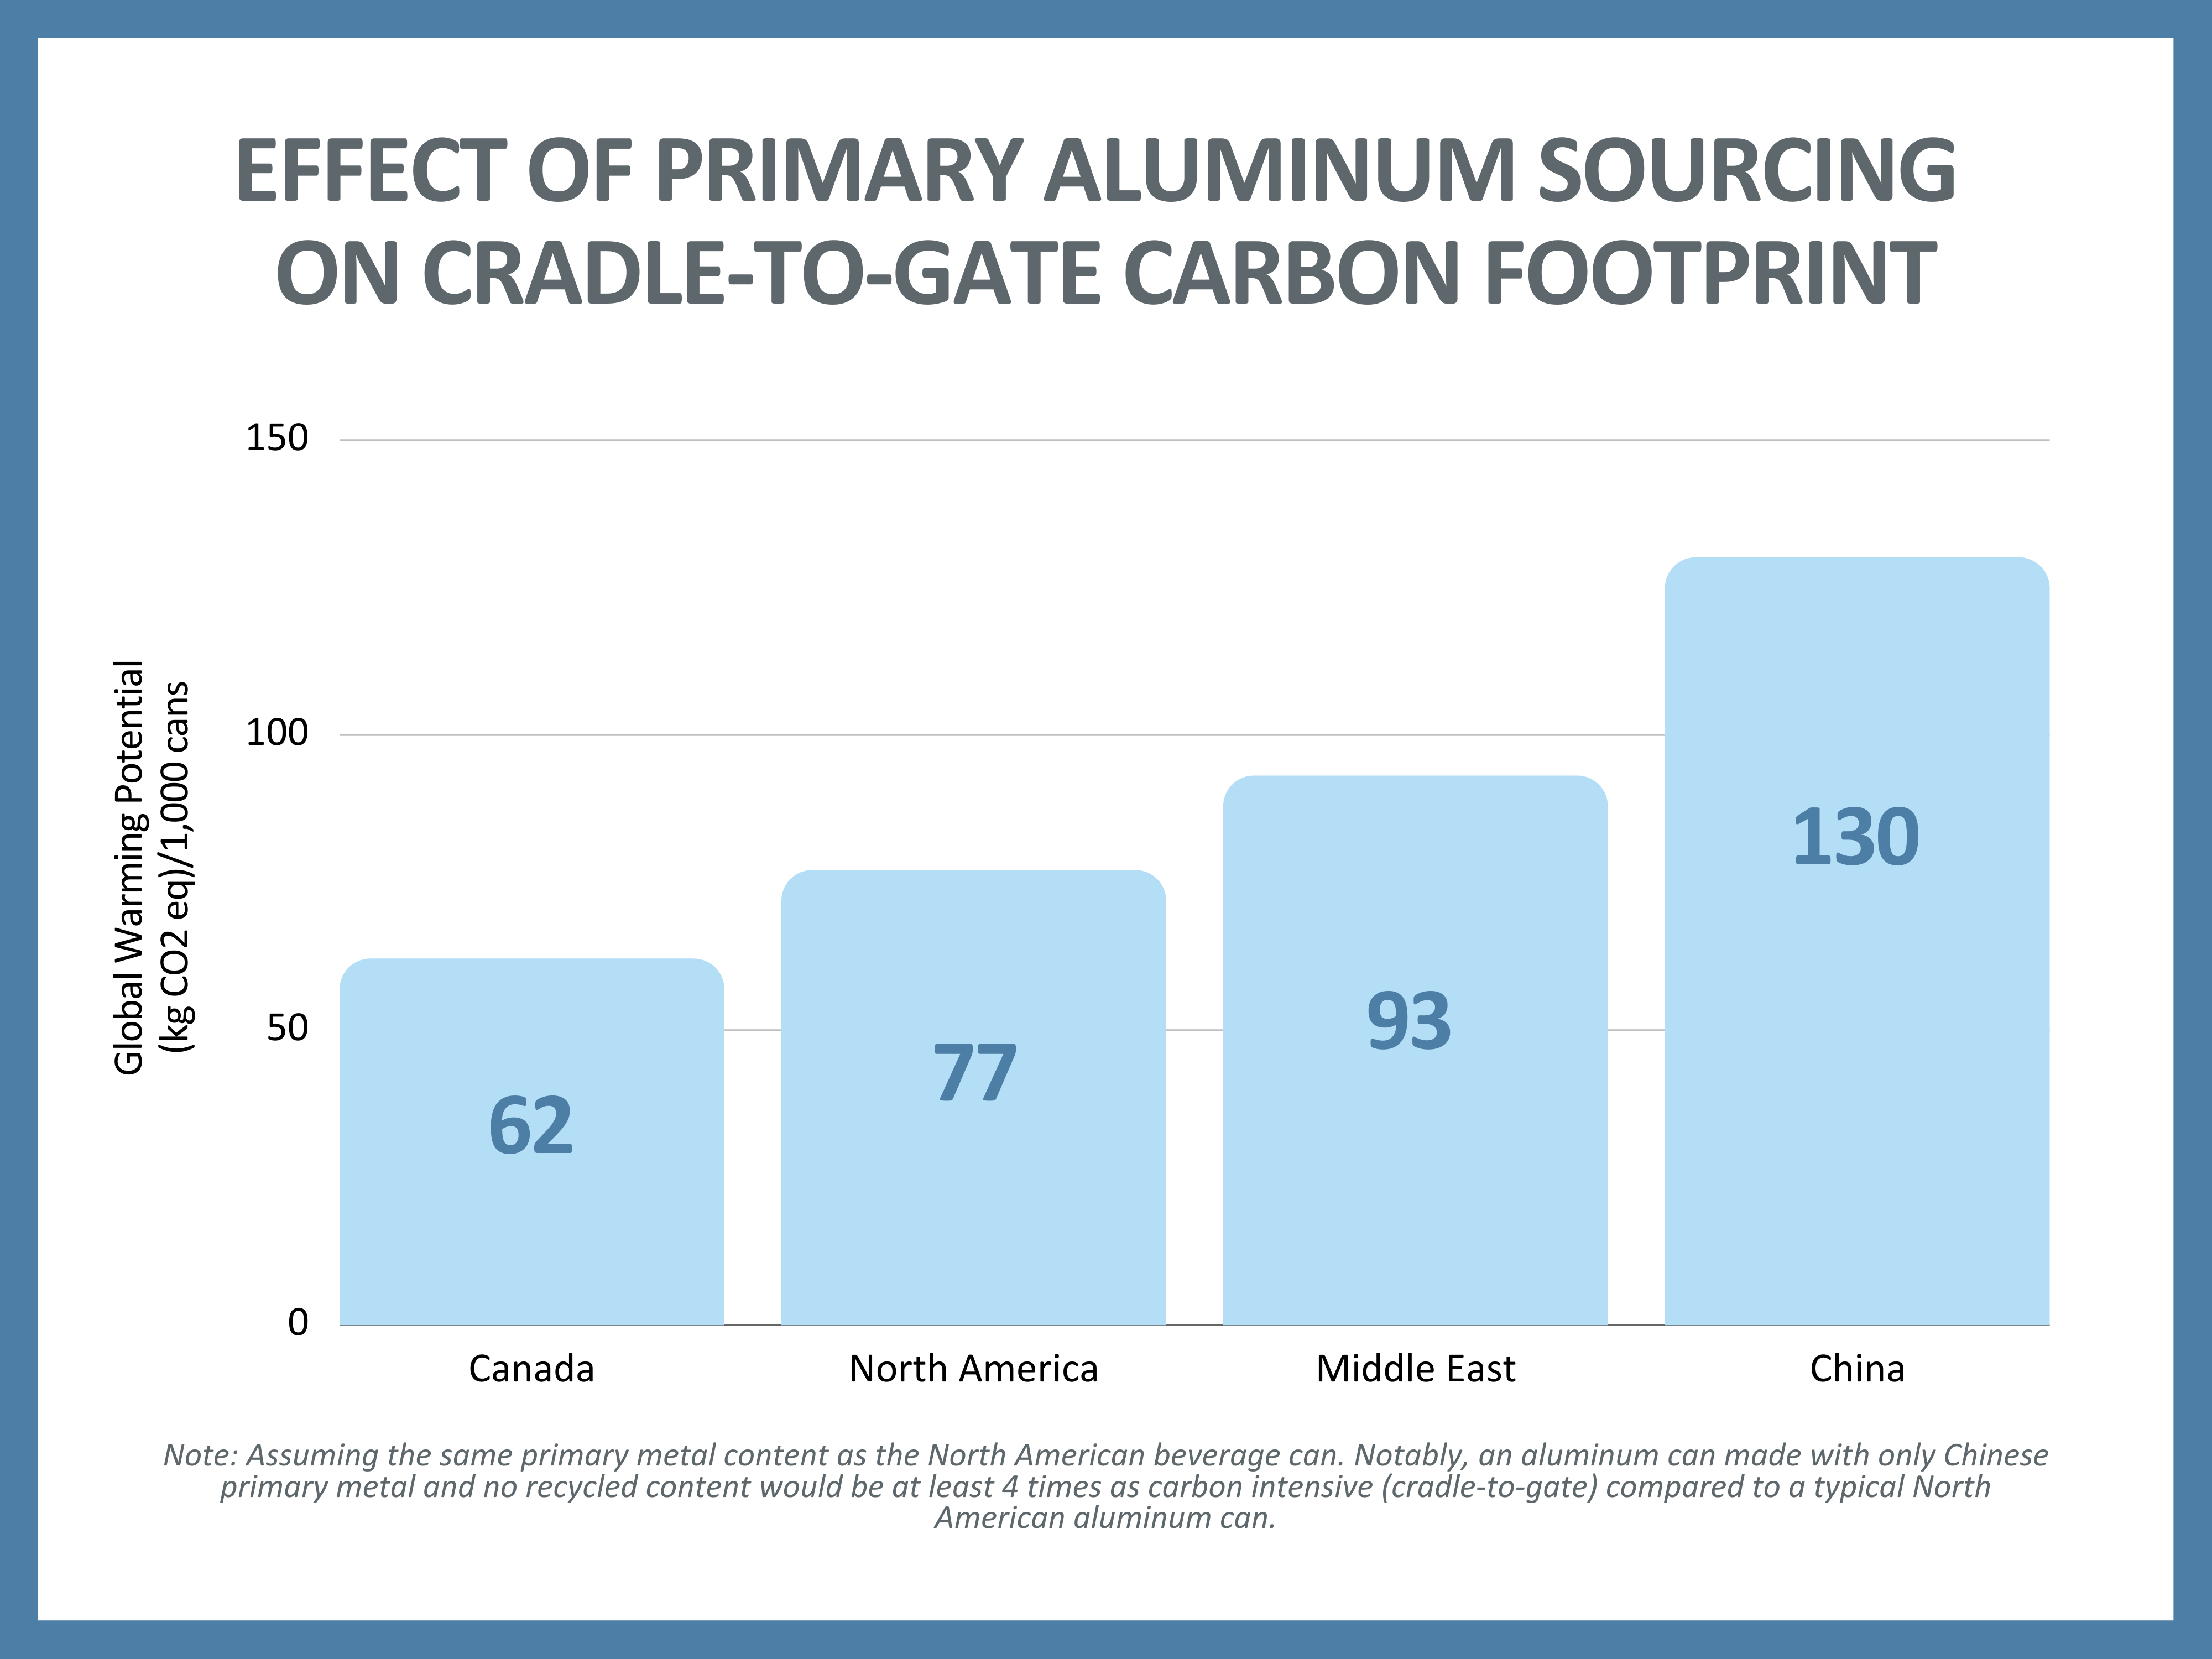 Chart showing cradle-to-gate carbon footprint for aluminum